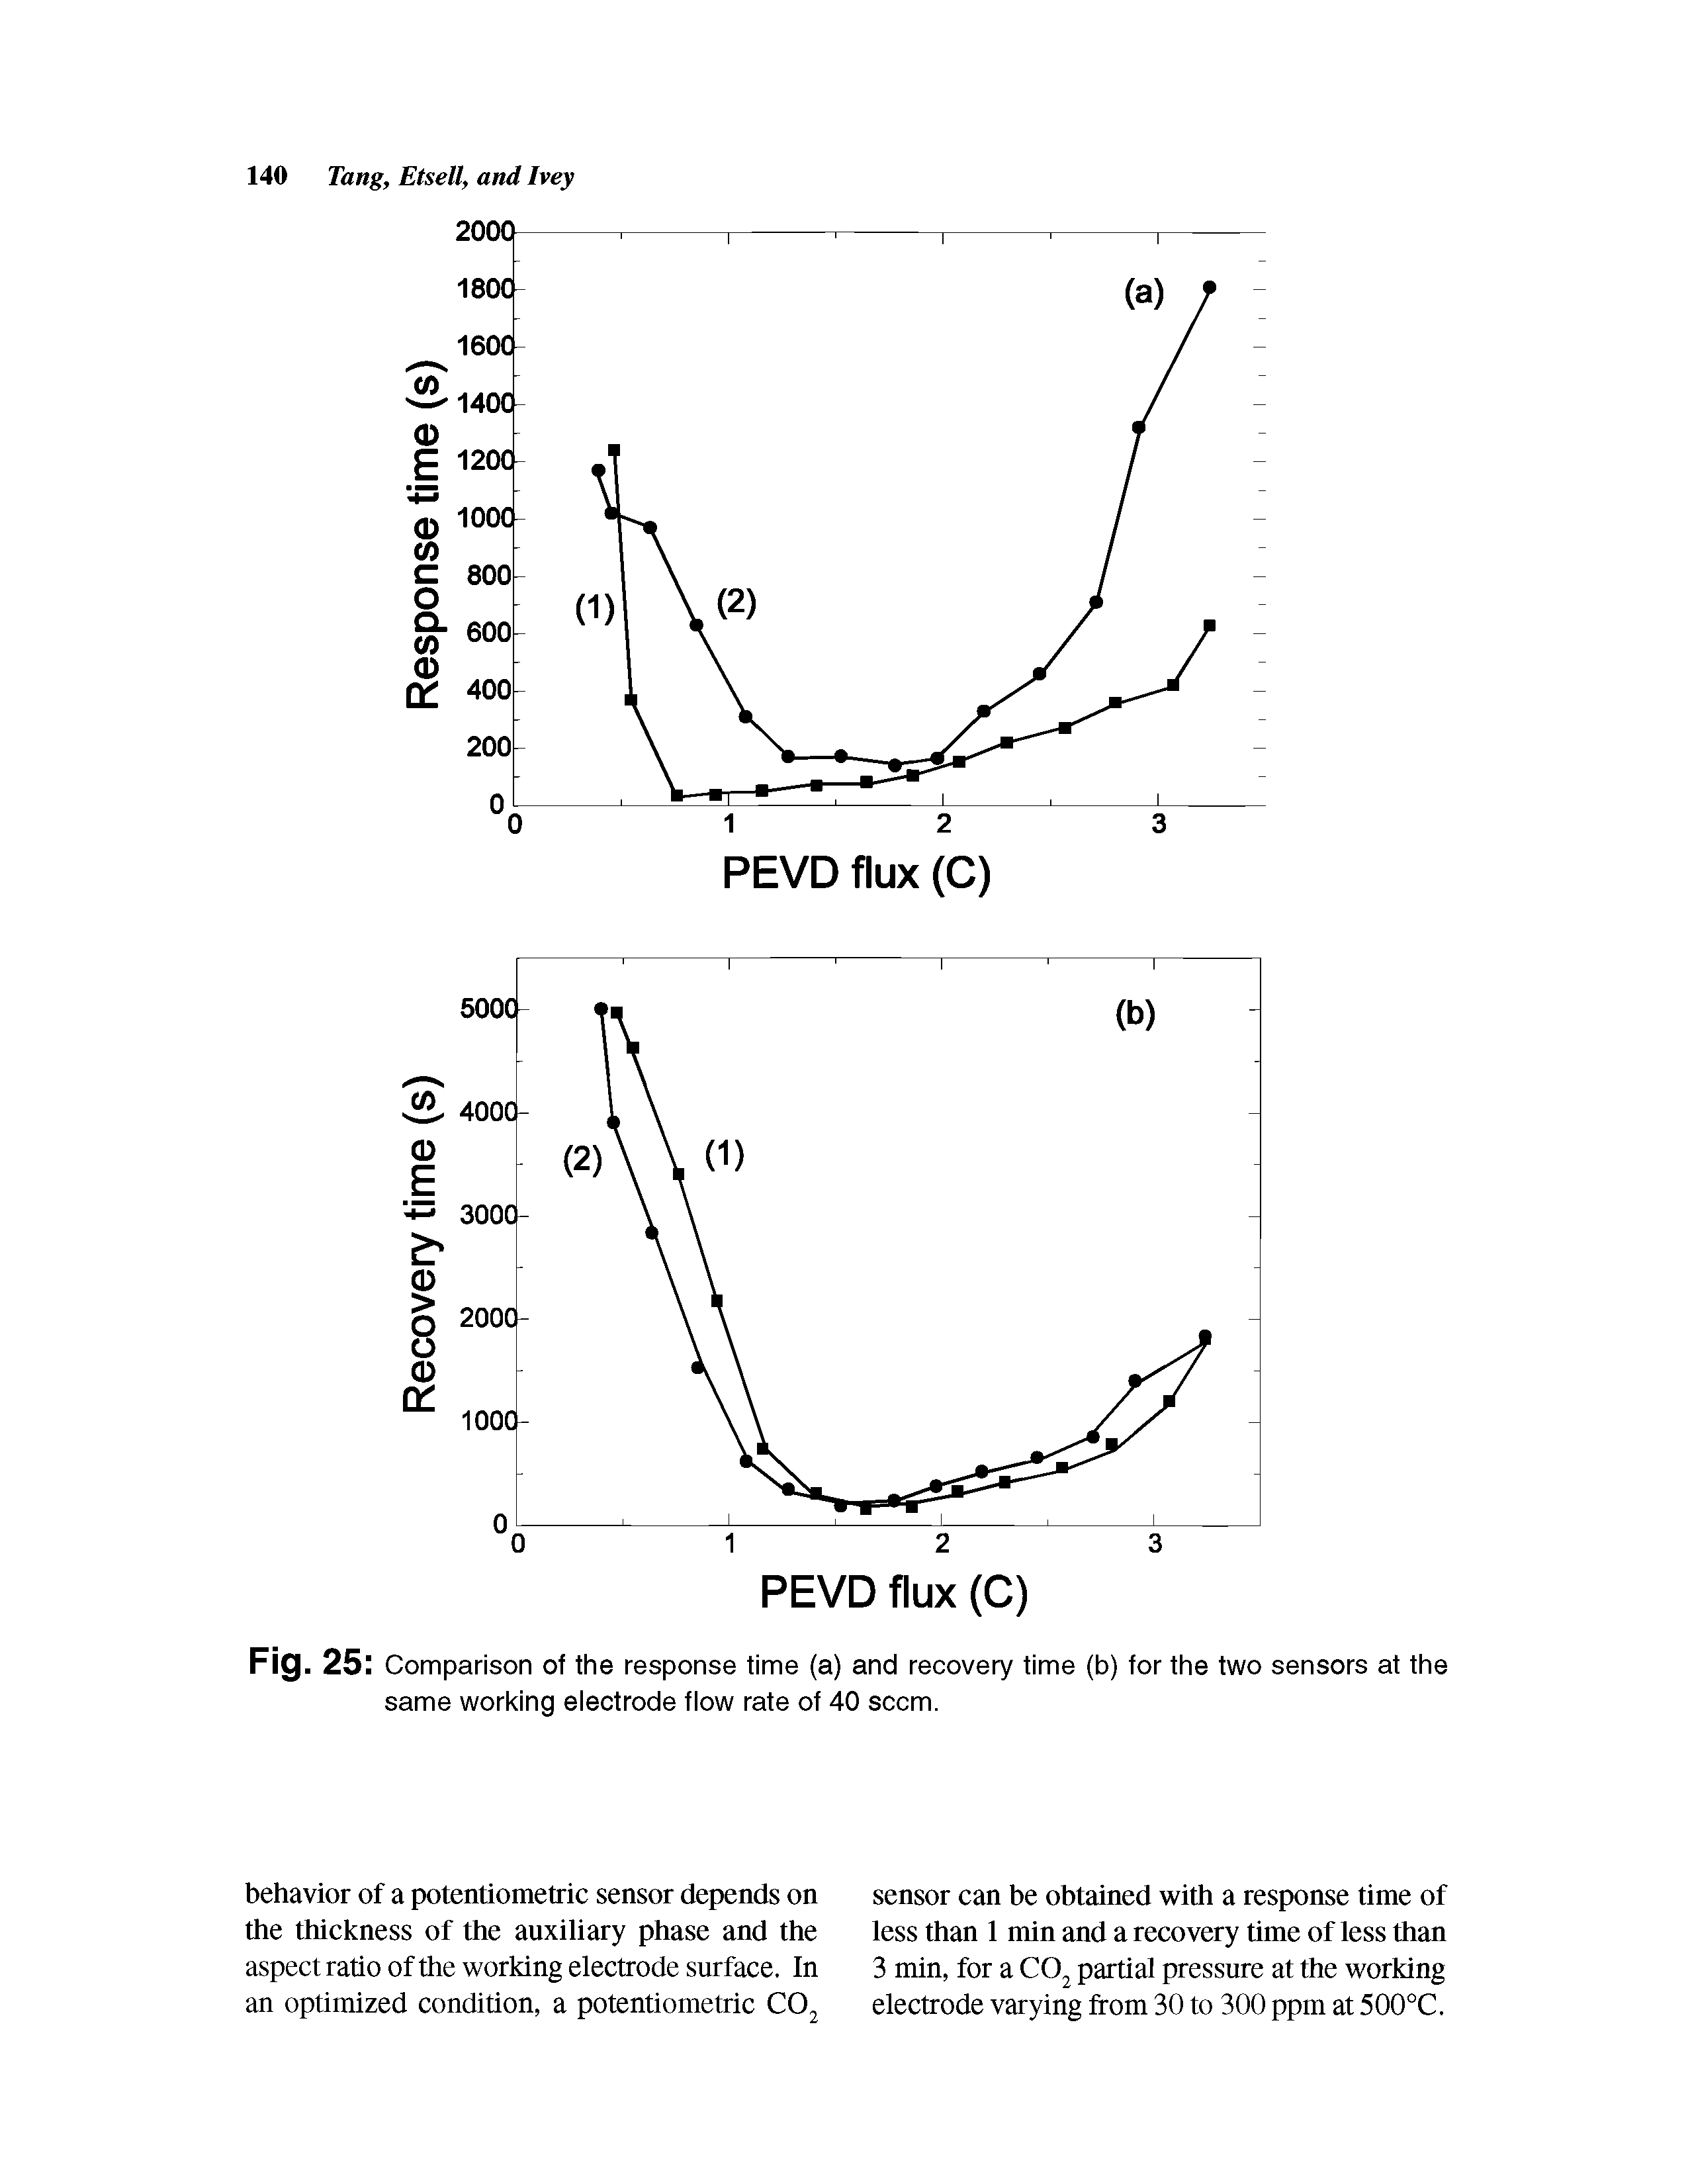 Fig. 25 Comparison of the response time (a) and recovery time (b) for the two same working electrode flow rate of 40 seem.